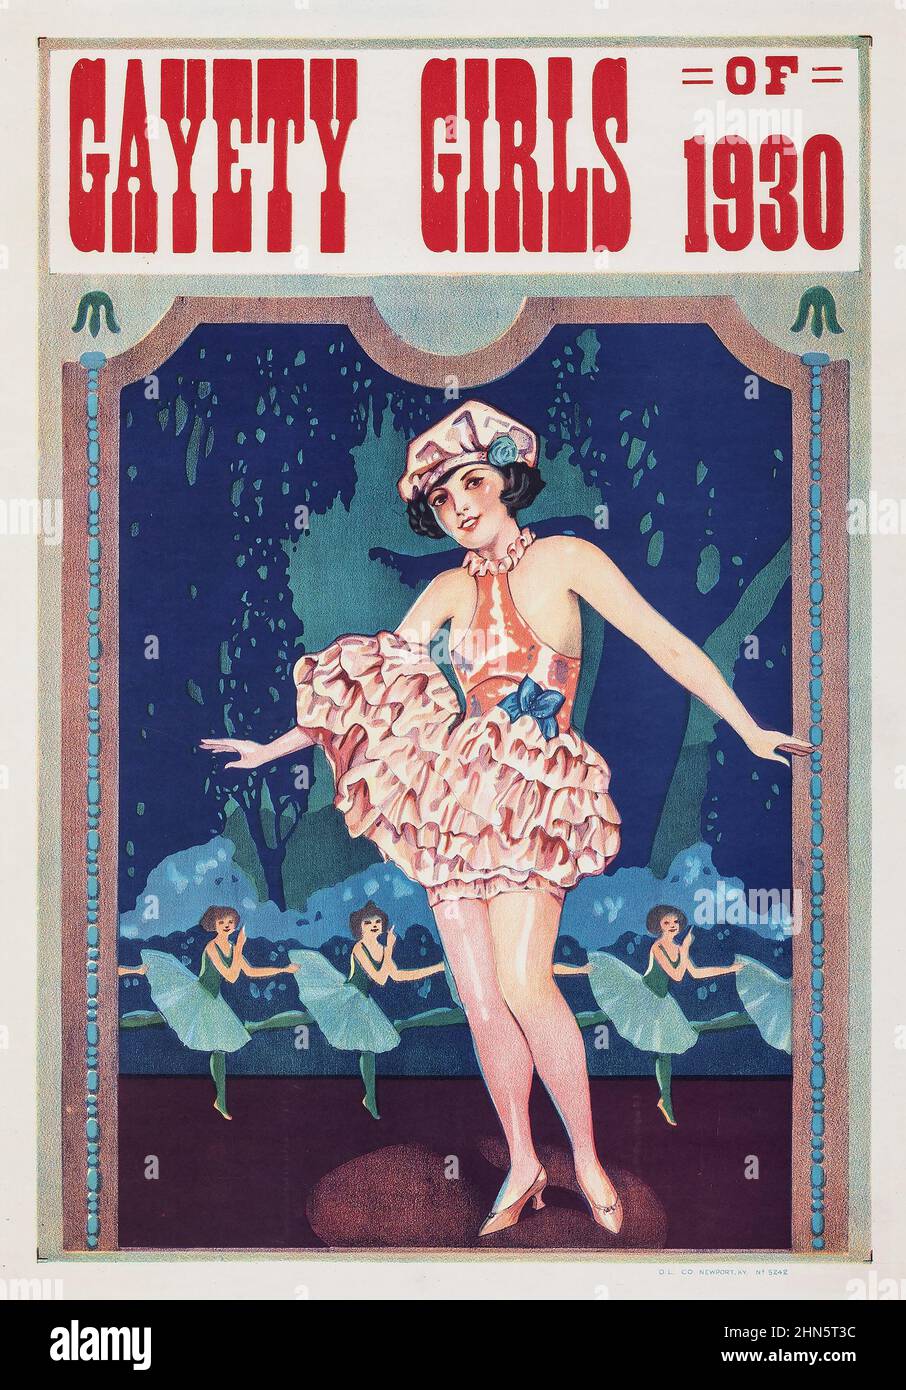 Gayety Girls of 1930. Theater Poster. Gayety Girls of 1930, a vaudeville show styled after the singing and dancing musical follies. Stock Photo